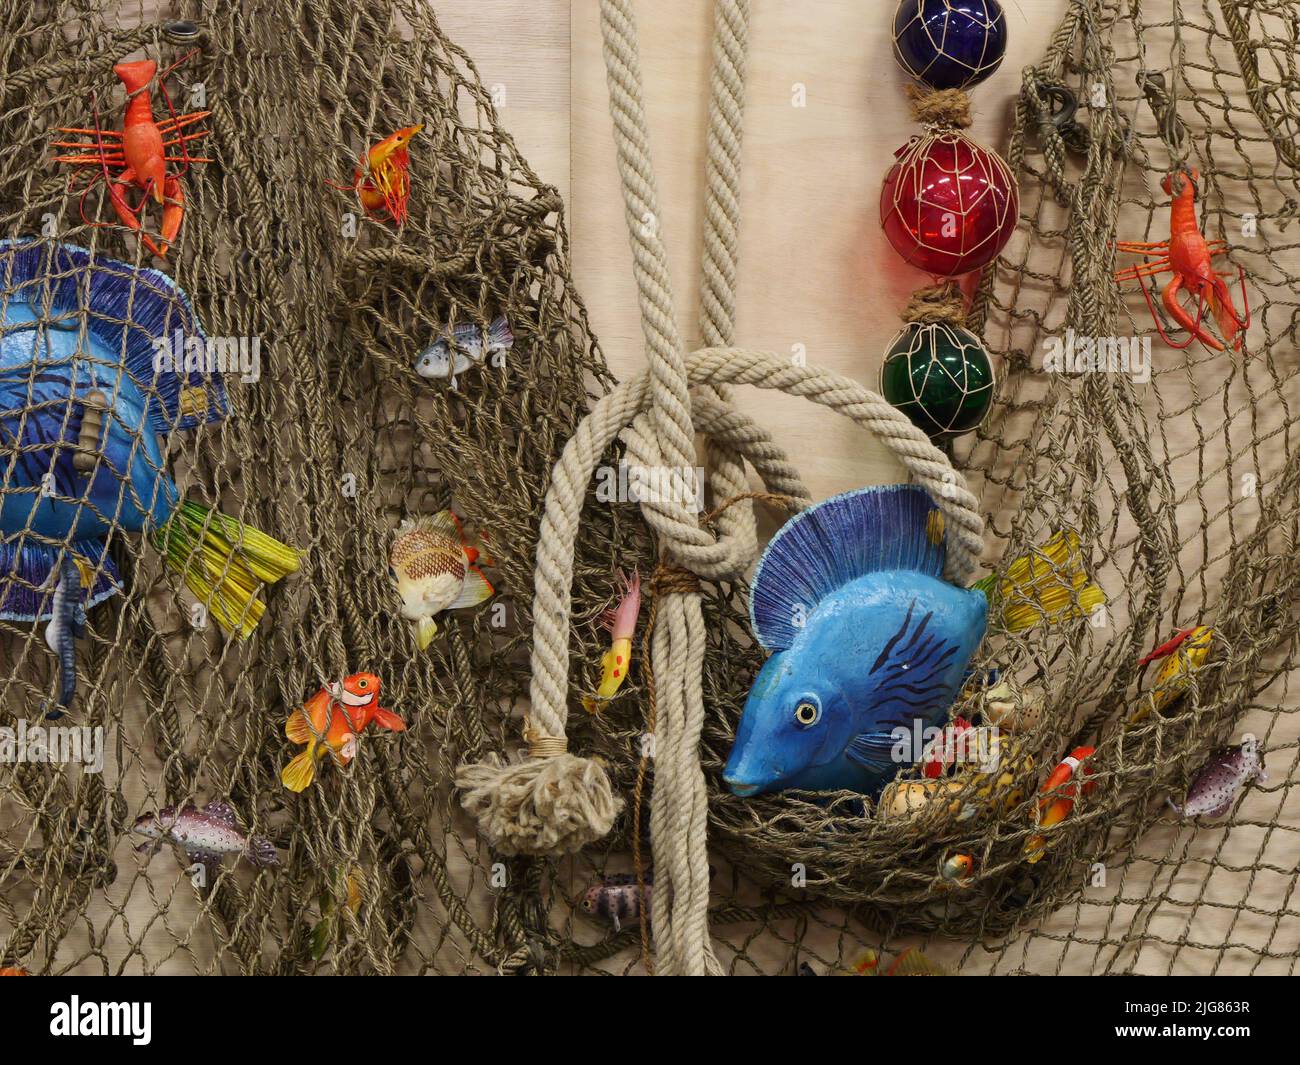 A beach art made from old fishing net and sea animal toys Stock Photo -  Alamy